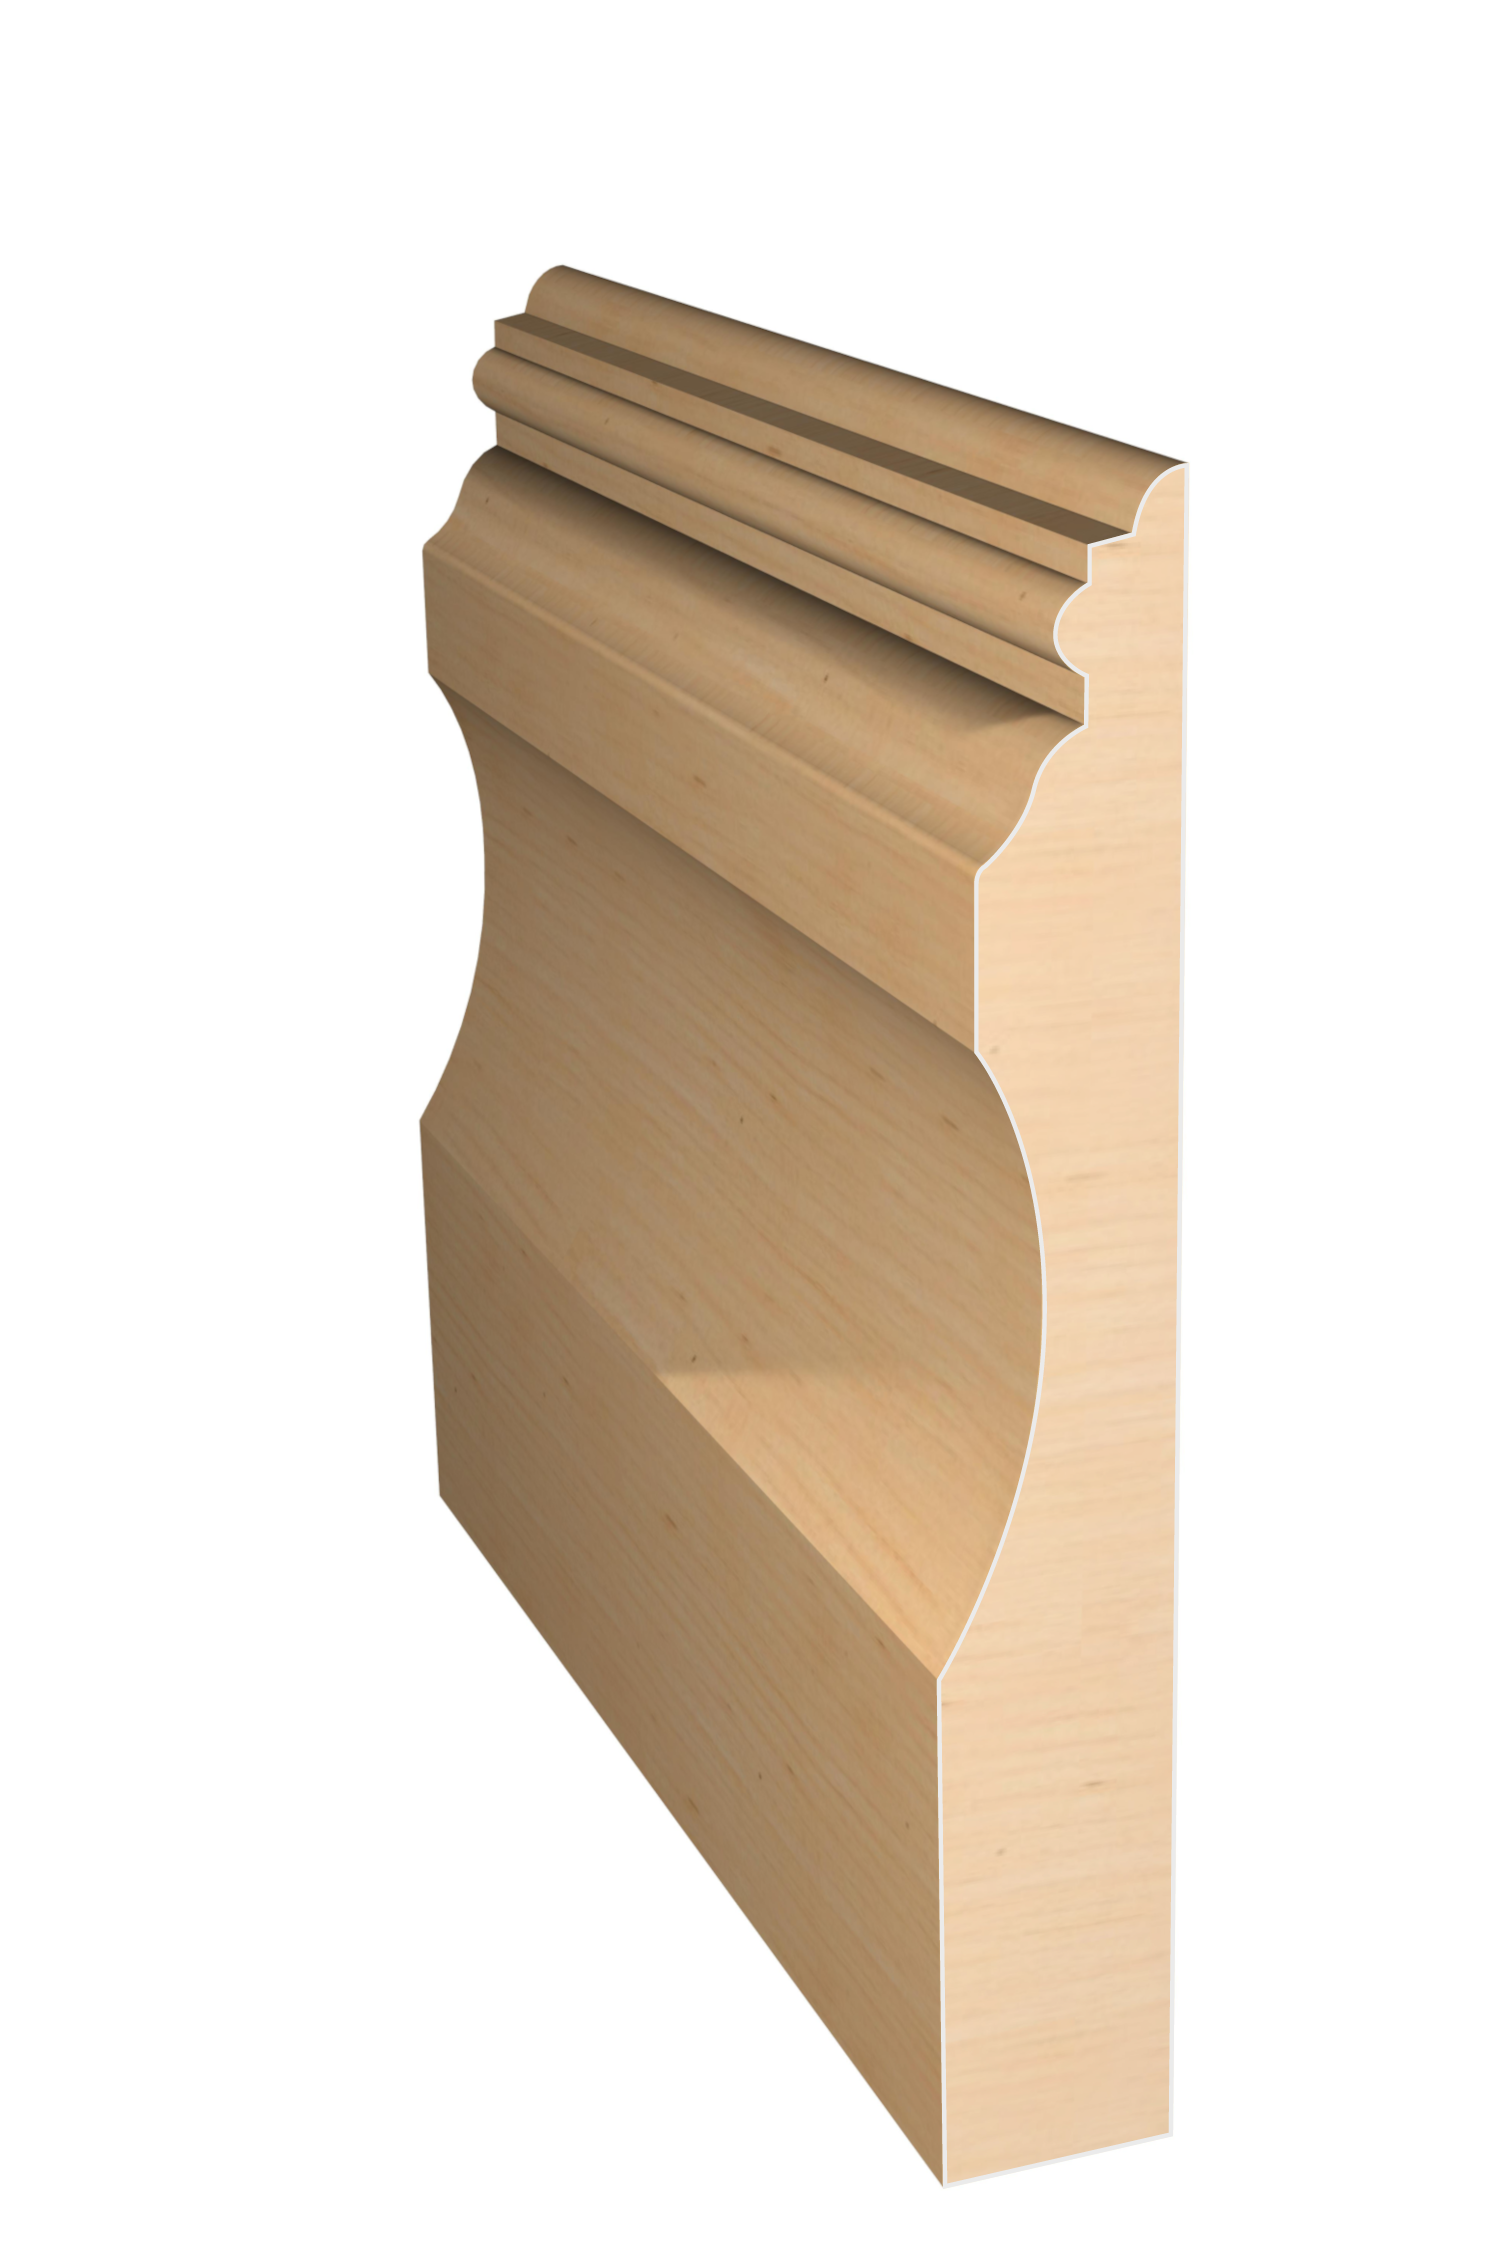 Three dimensional rendering of custom base wood molding BAPL51229 made by Public Lumber Company in Detroit.